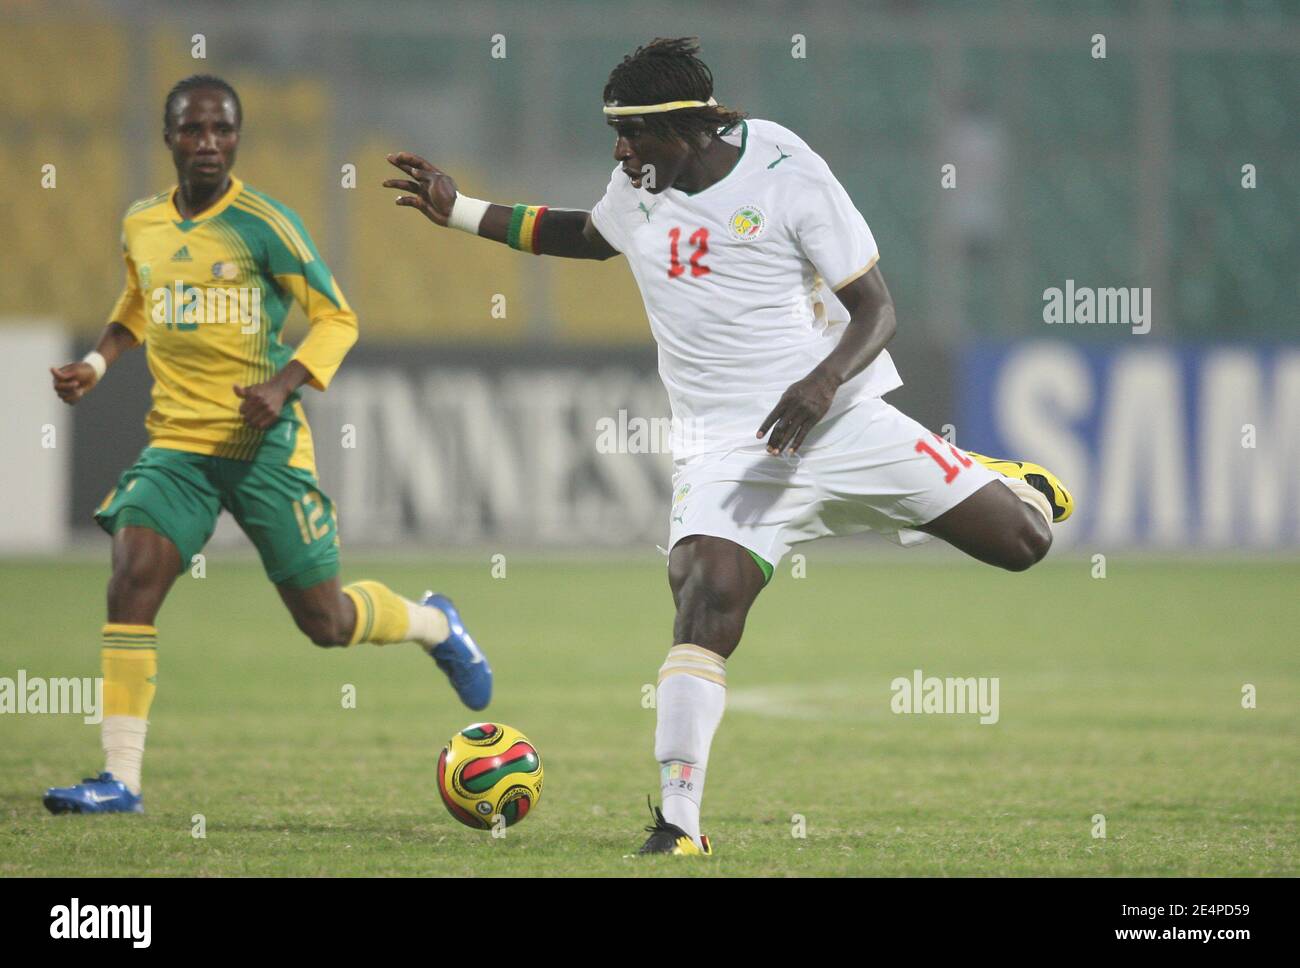 Senegal's Bayal Sall Moustapha during the African Cup of Nations soccer match, Senegal vs South Africa in Kumasi, Ghana on January 31, 2008. The match ended in a 1-1 draw. Senegal failed to qualify for the next round of the competition. Photo by Steeve McMay/Cameleon/ABACAPRESS.COM Stock Photo